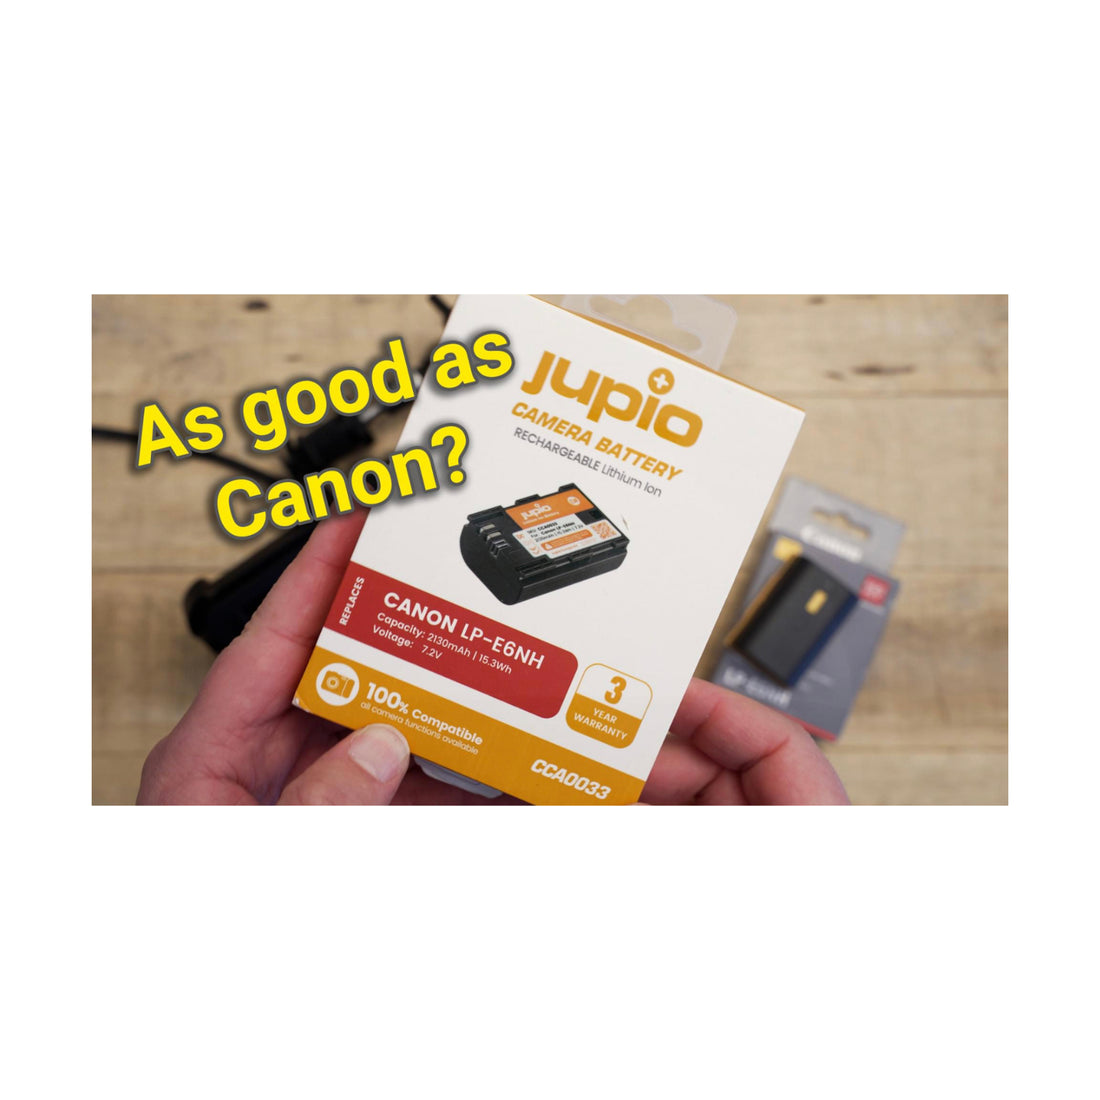 The Jupio Canon LP-E6NH replacement, is it any good? - Quick performance comparison